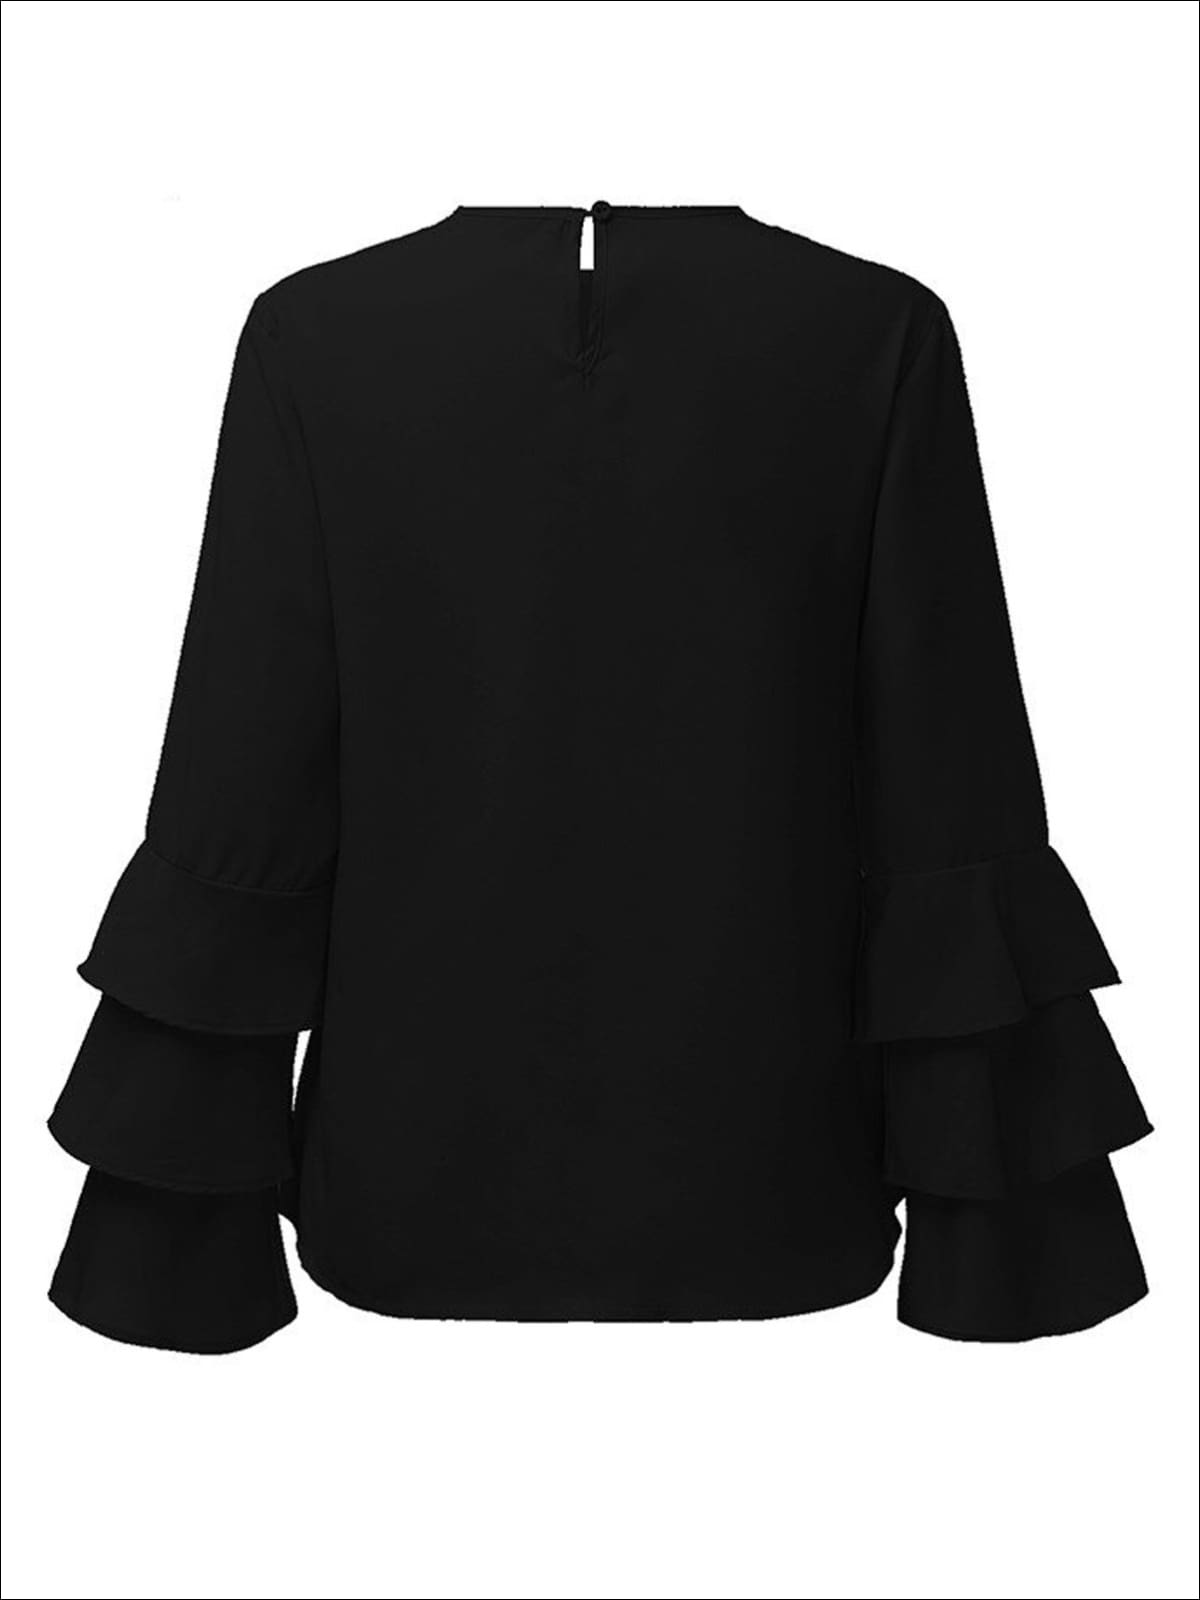 Lindsey Black Ruffle Top - Twisted Spur Boutique OUTLET